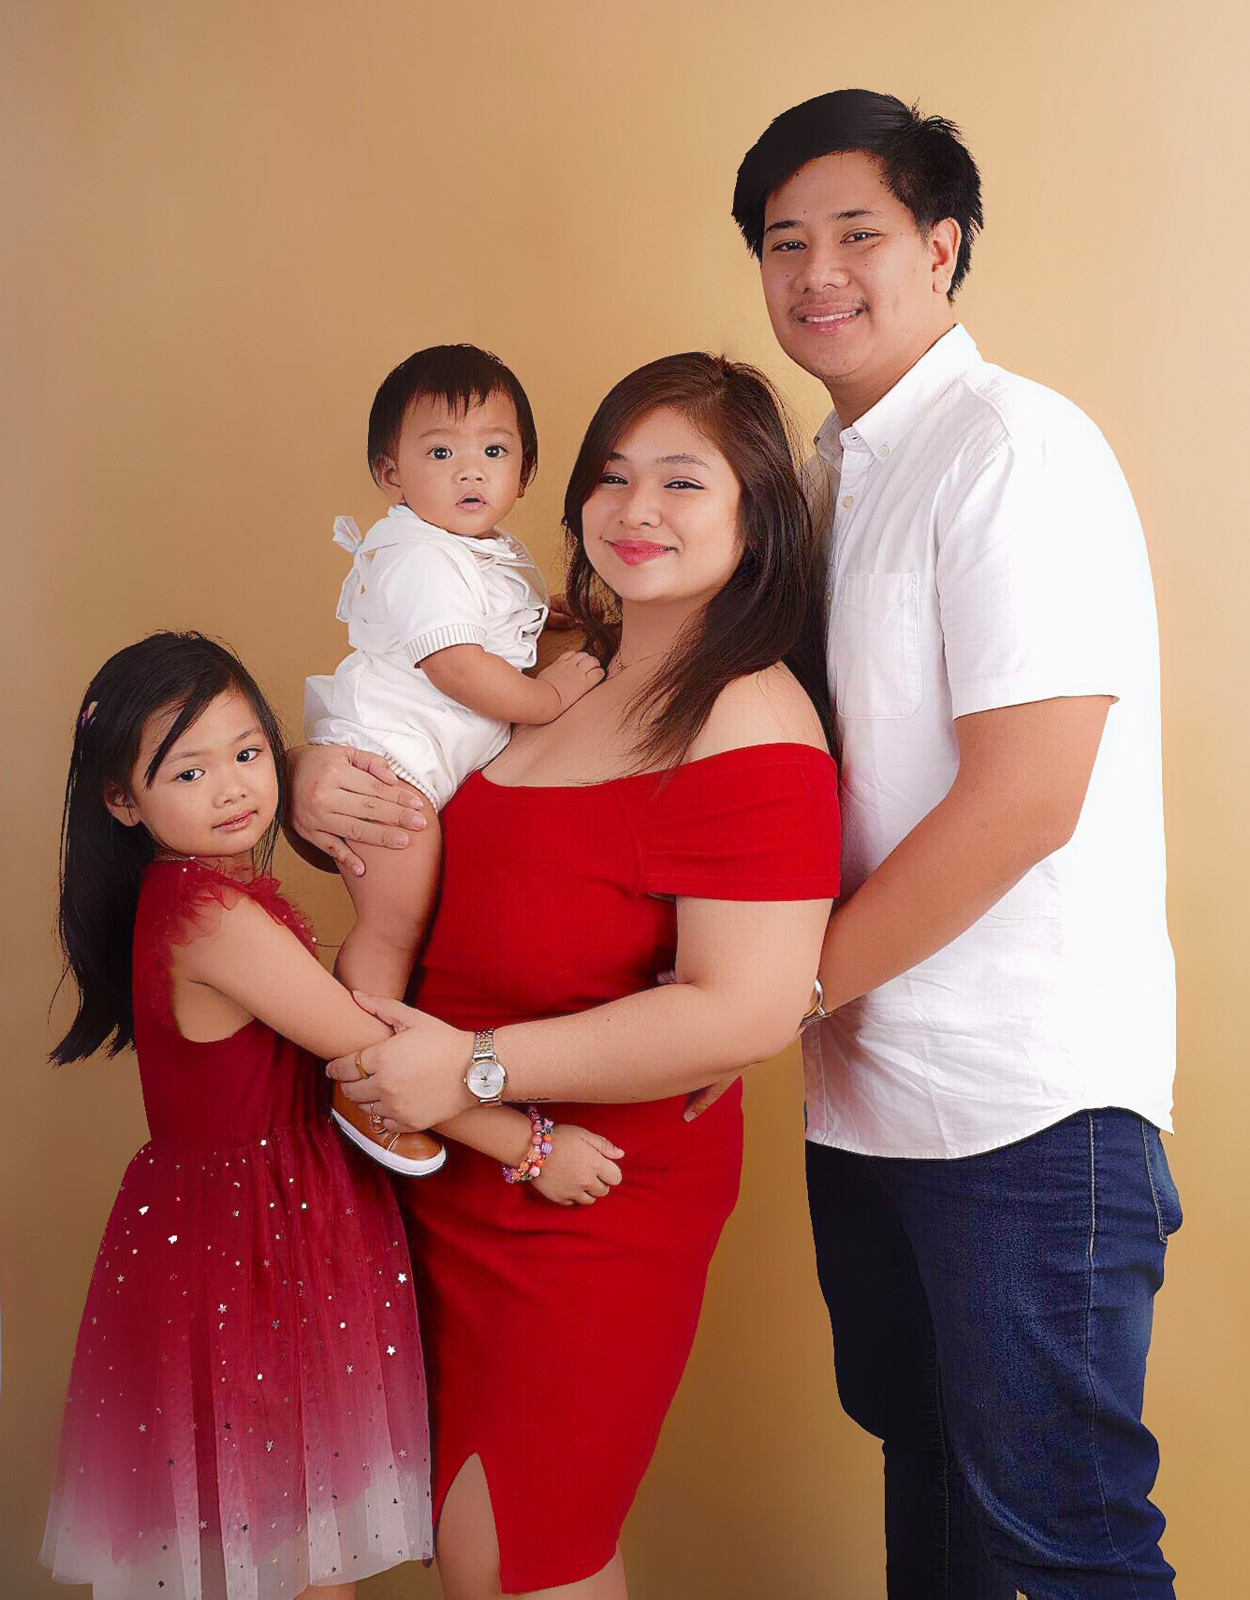 Arramaine Serrano, also known as Kitty, with her family